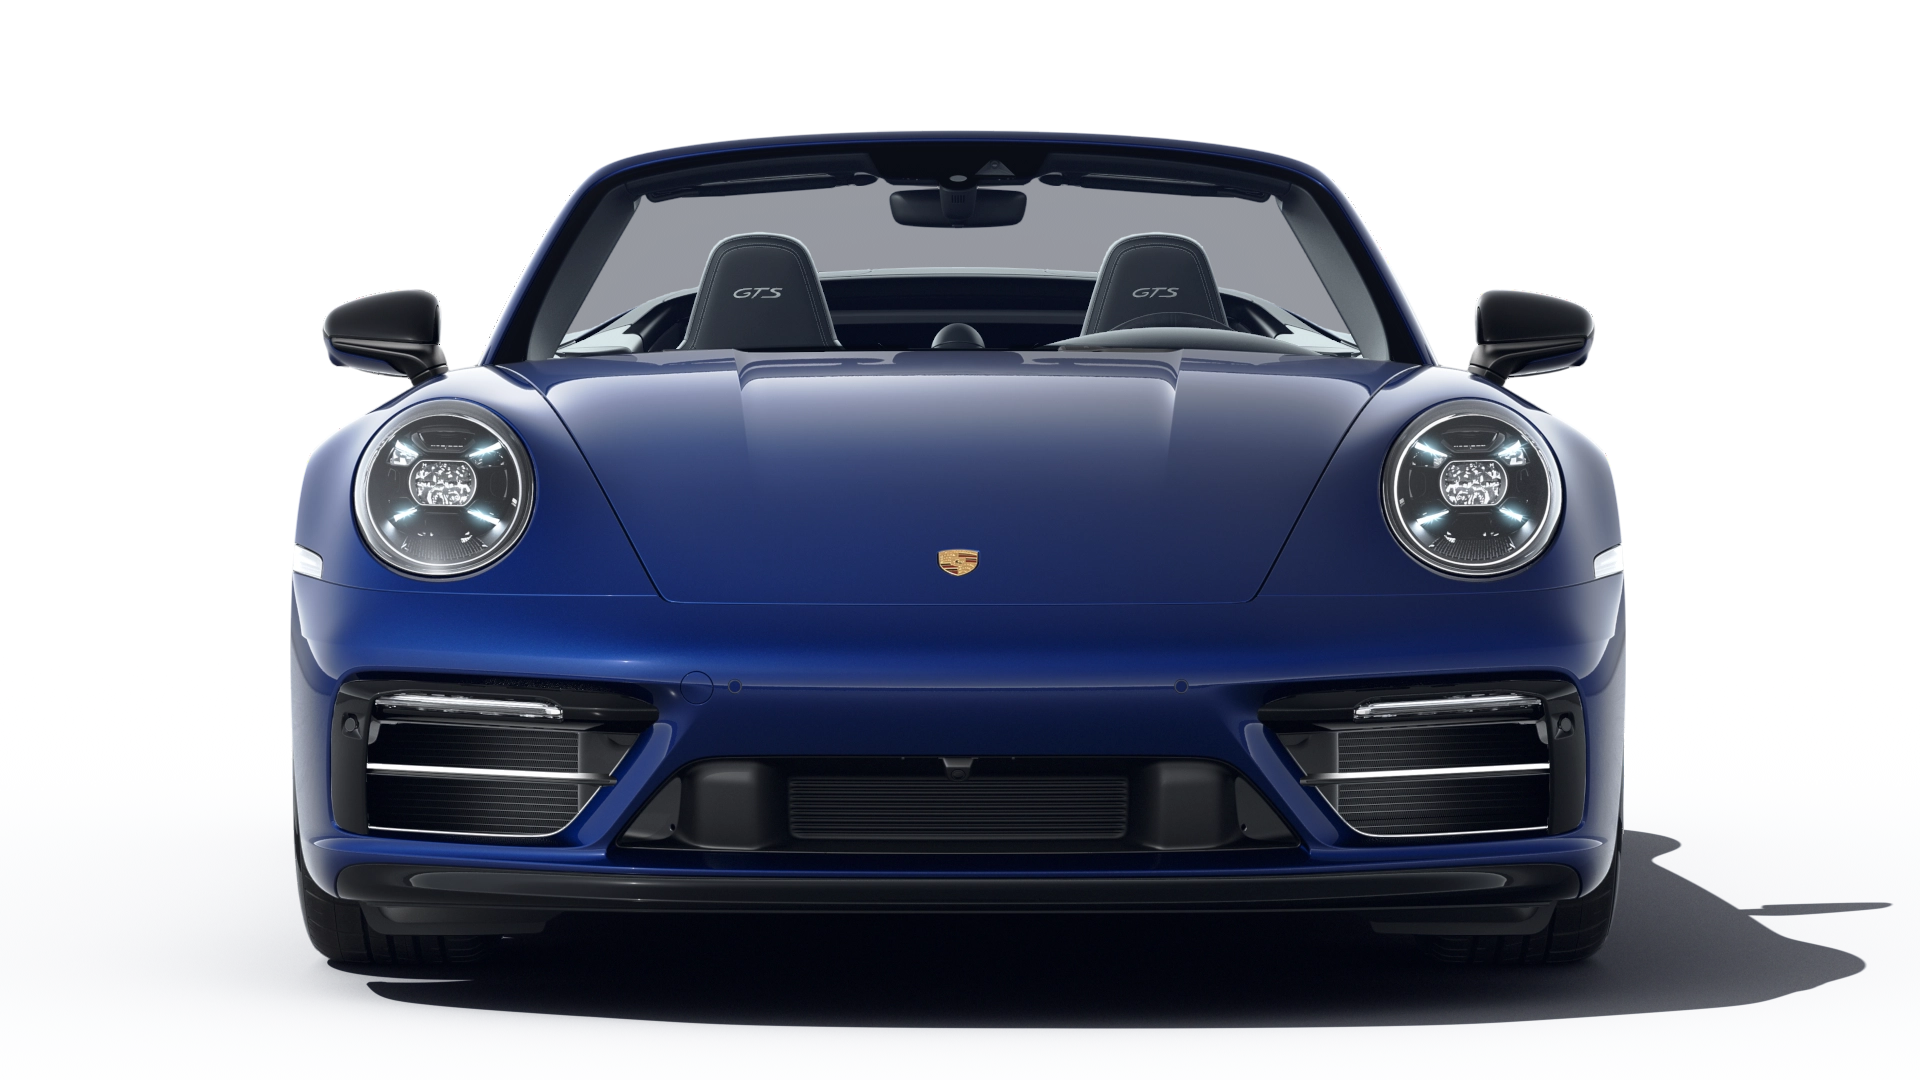 911 Carrera 4 GTS Cabriolet vehicle details